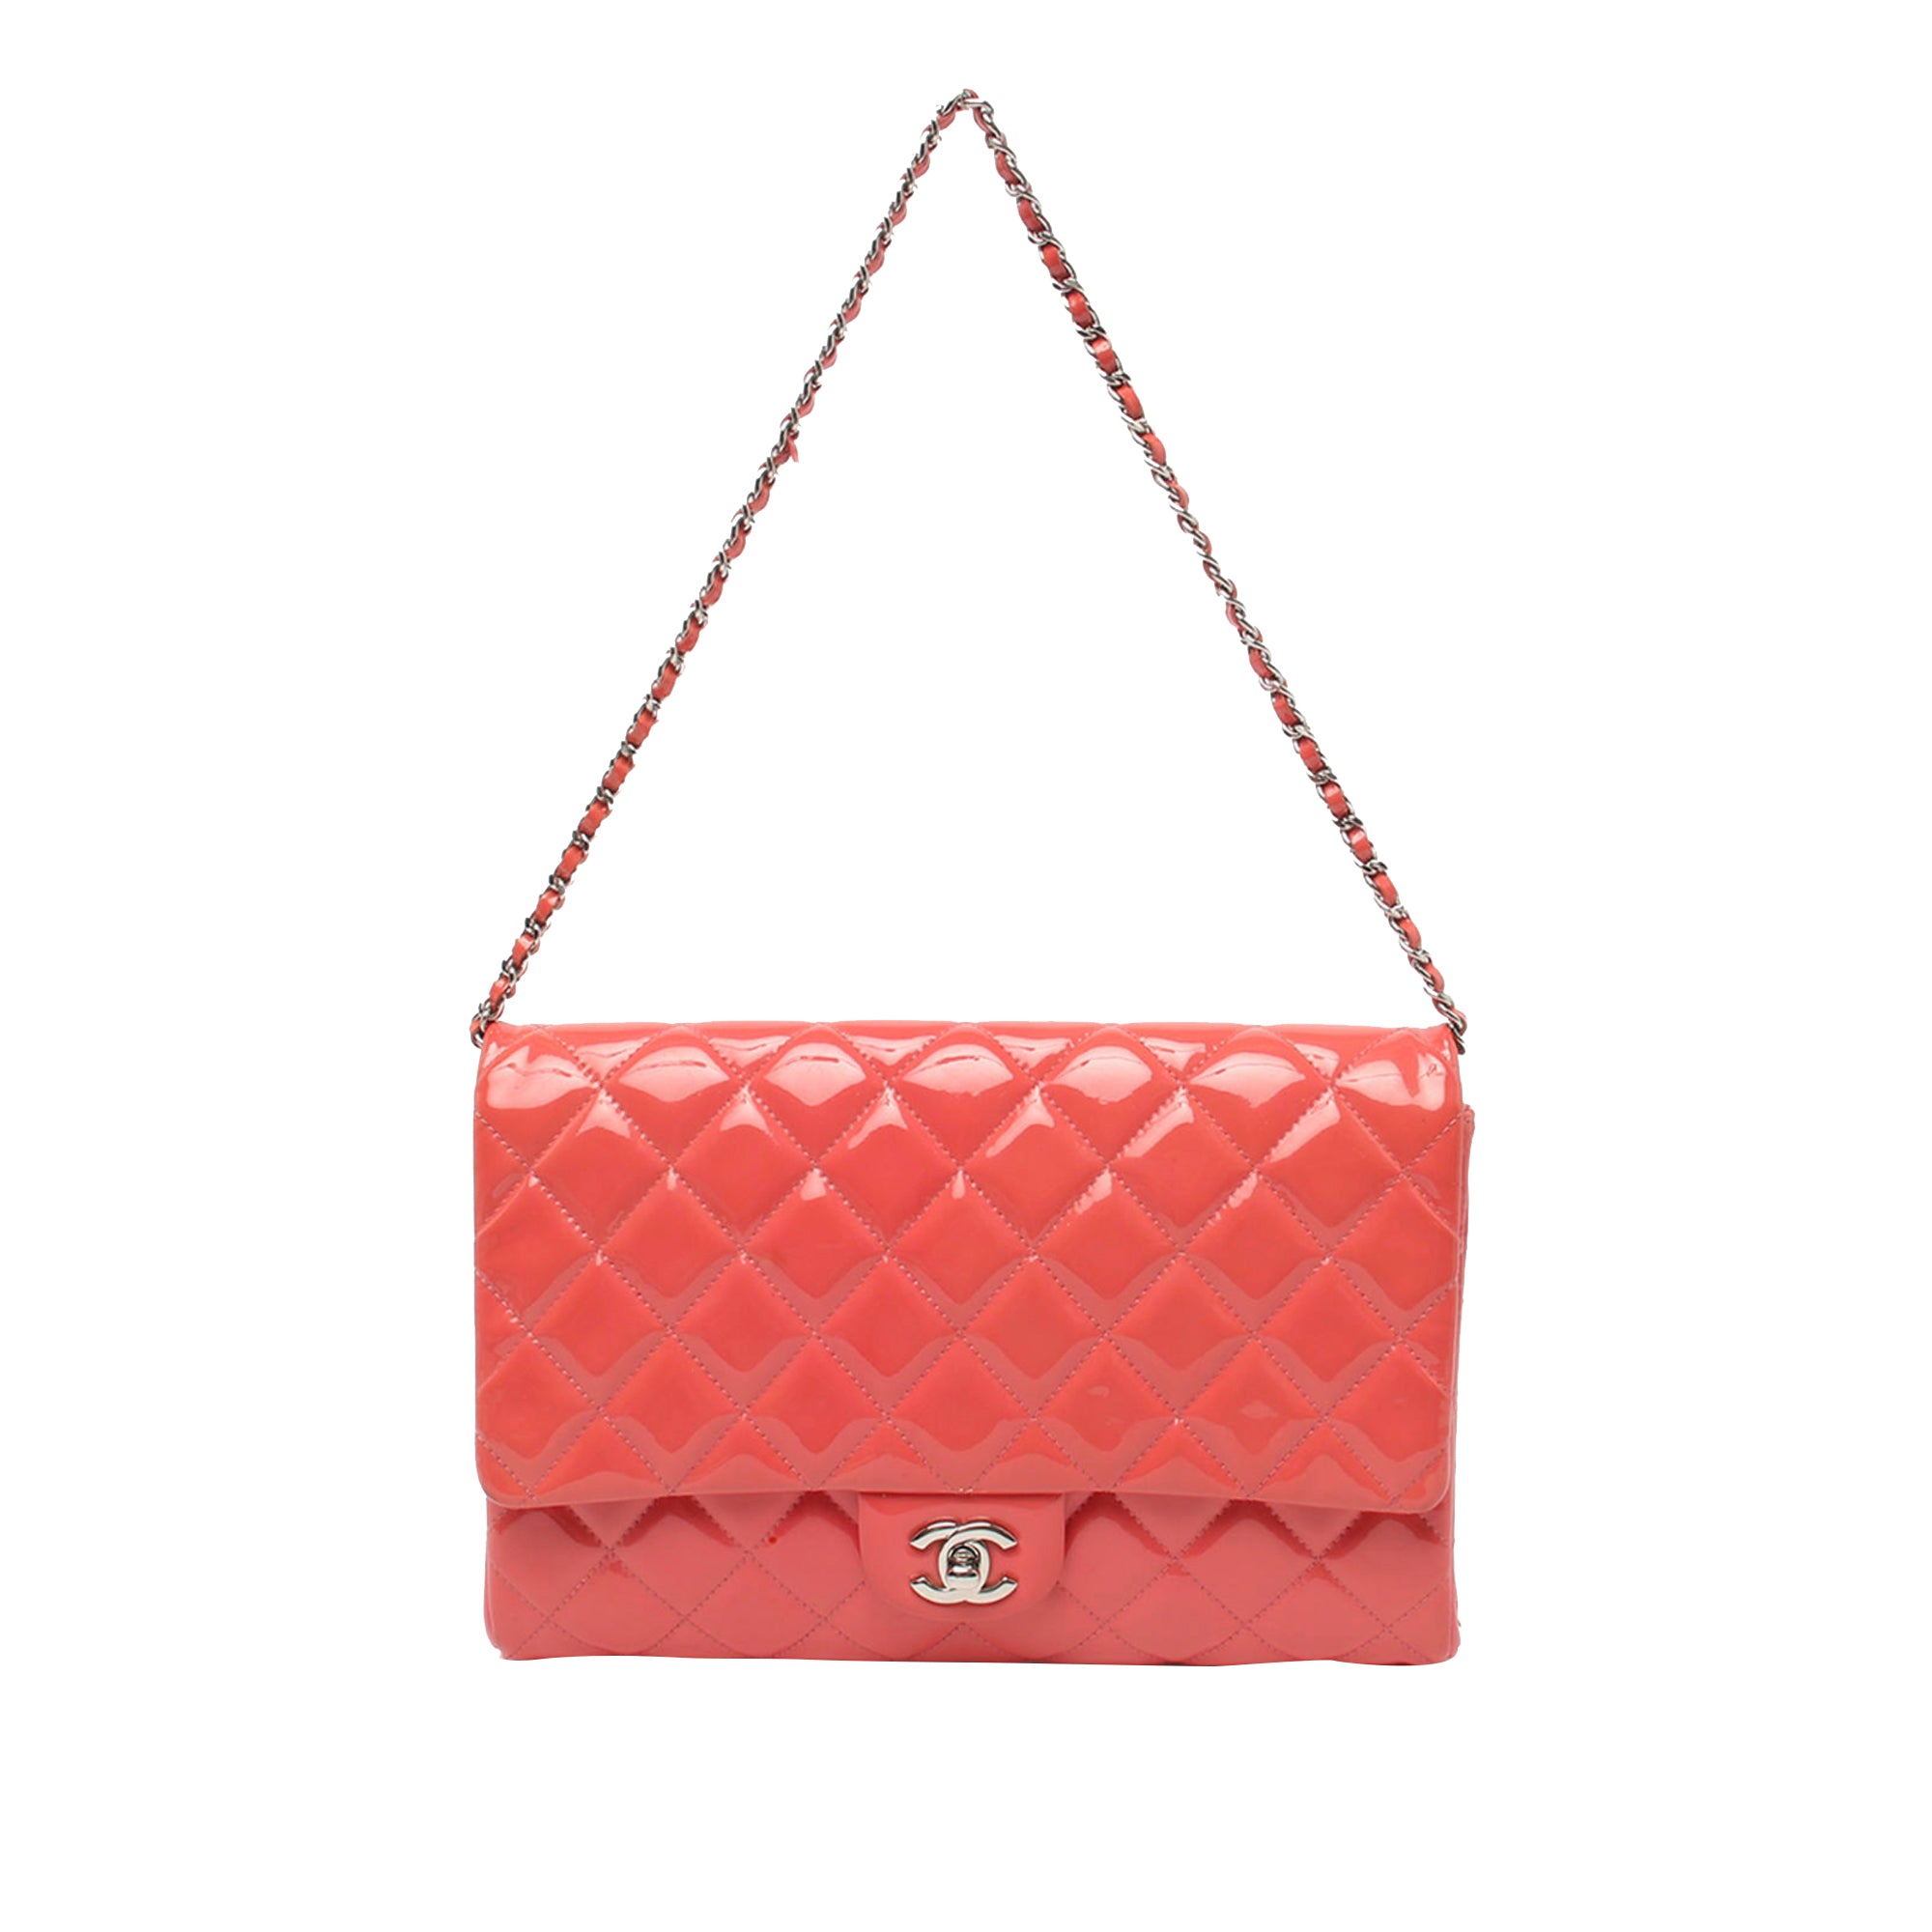 CHANEL Chanel Patent Leather Flap Bag Coral - Vault 55